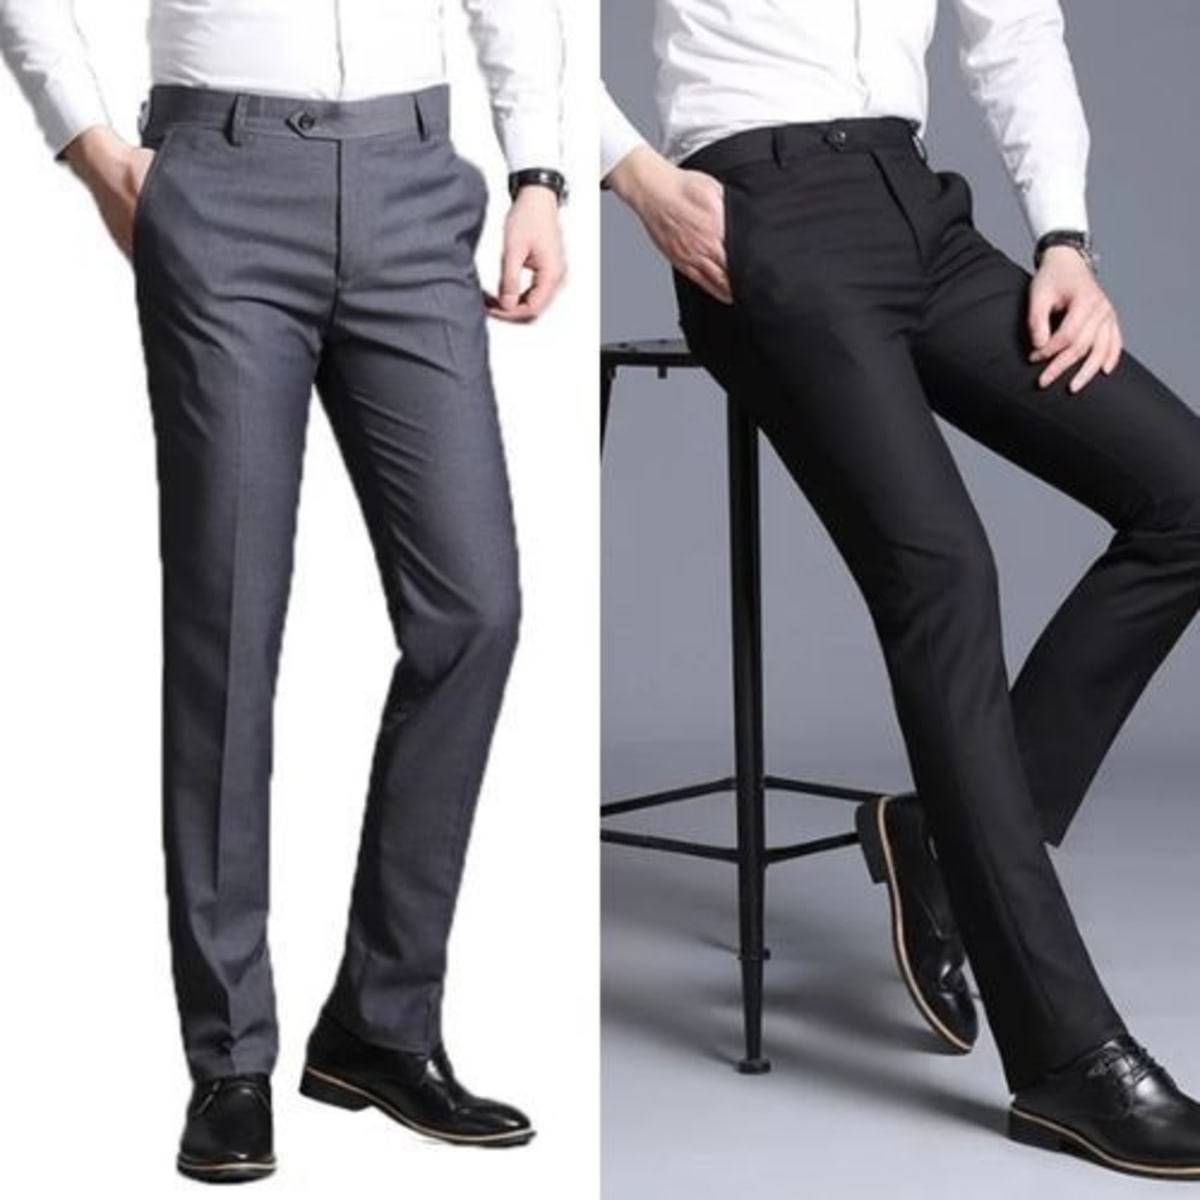 Autumn Business Suit Pants Men Clothing All Match Formal Wear Office  Trousers  eBay